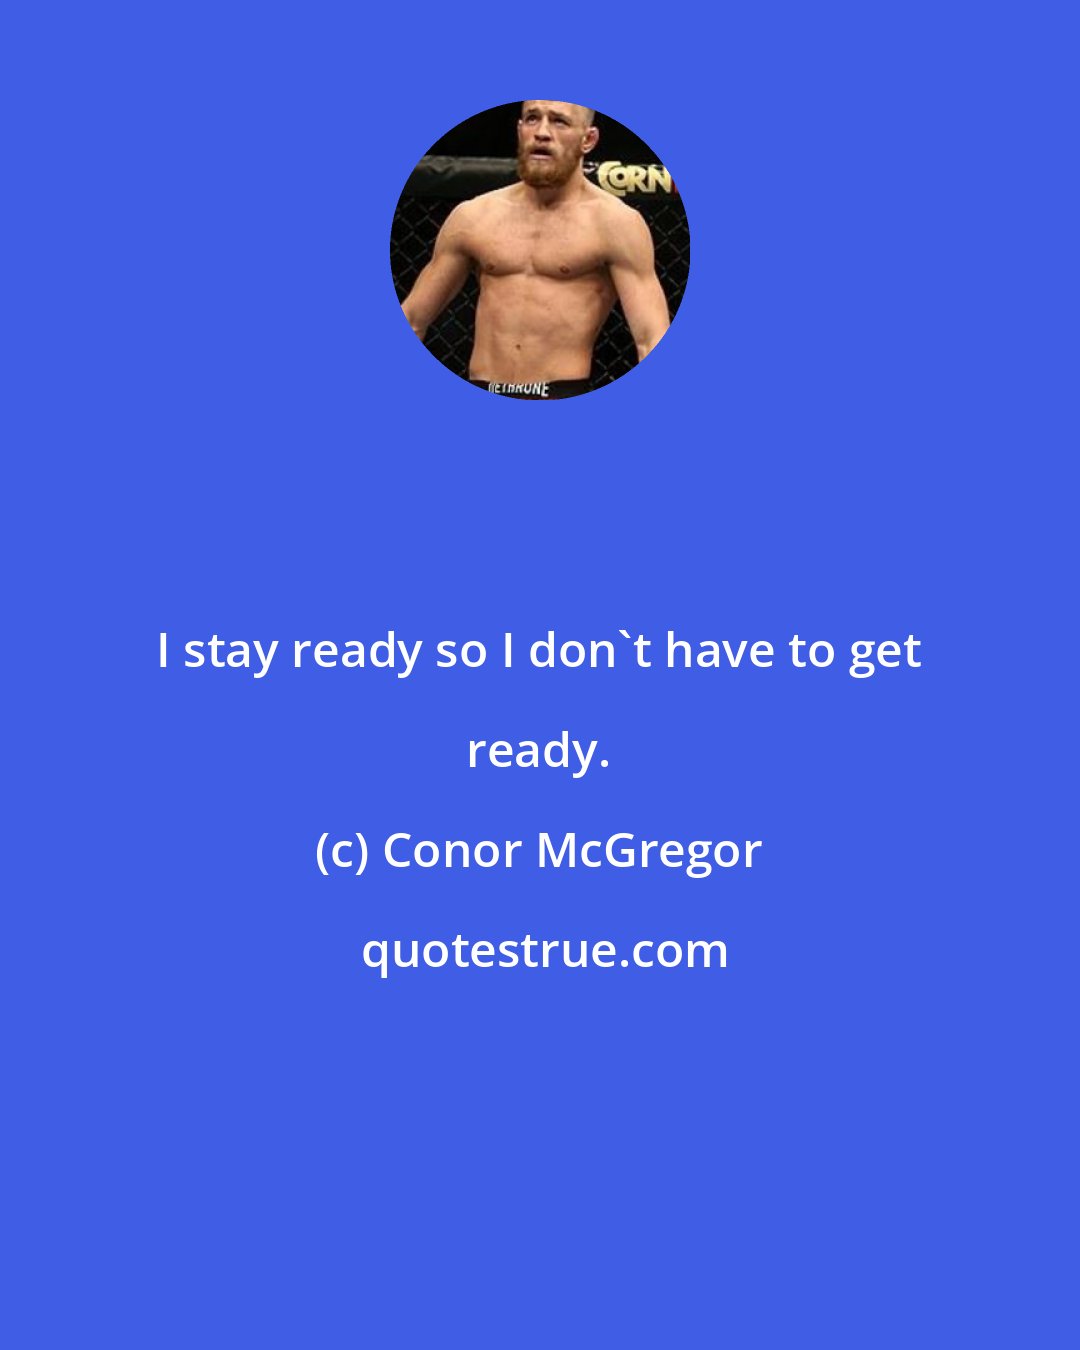 Conor McGregor: I stay ready so I don't have to get ready.